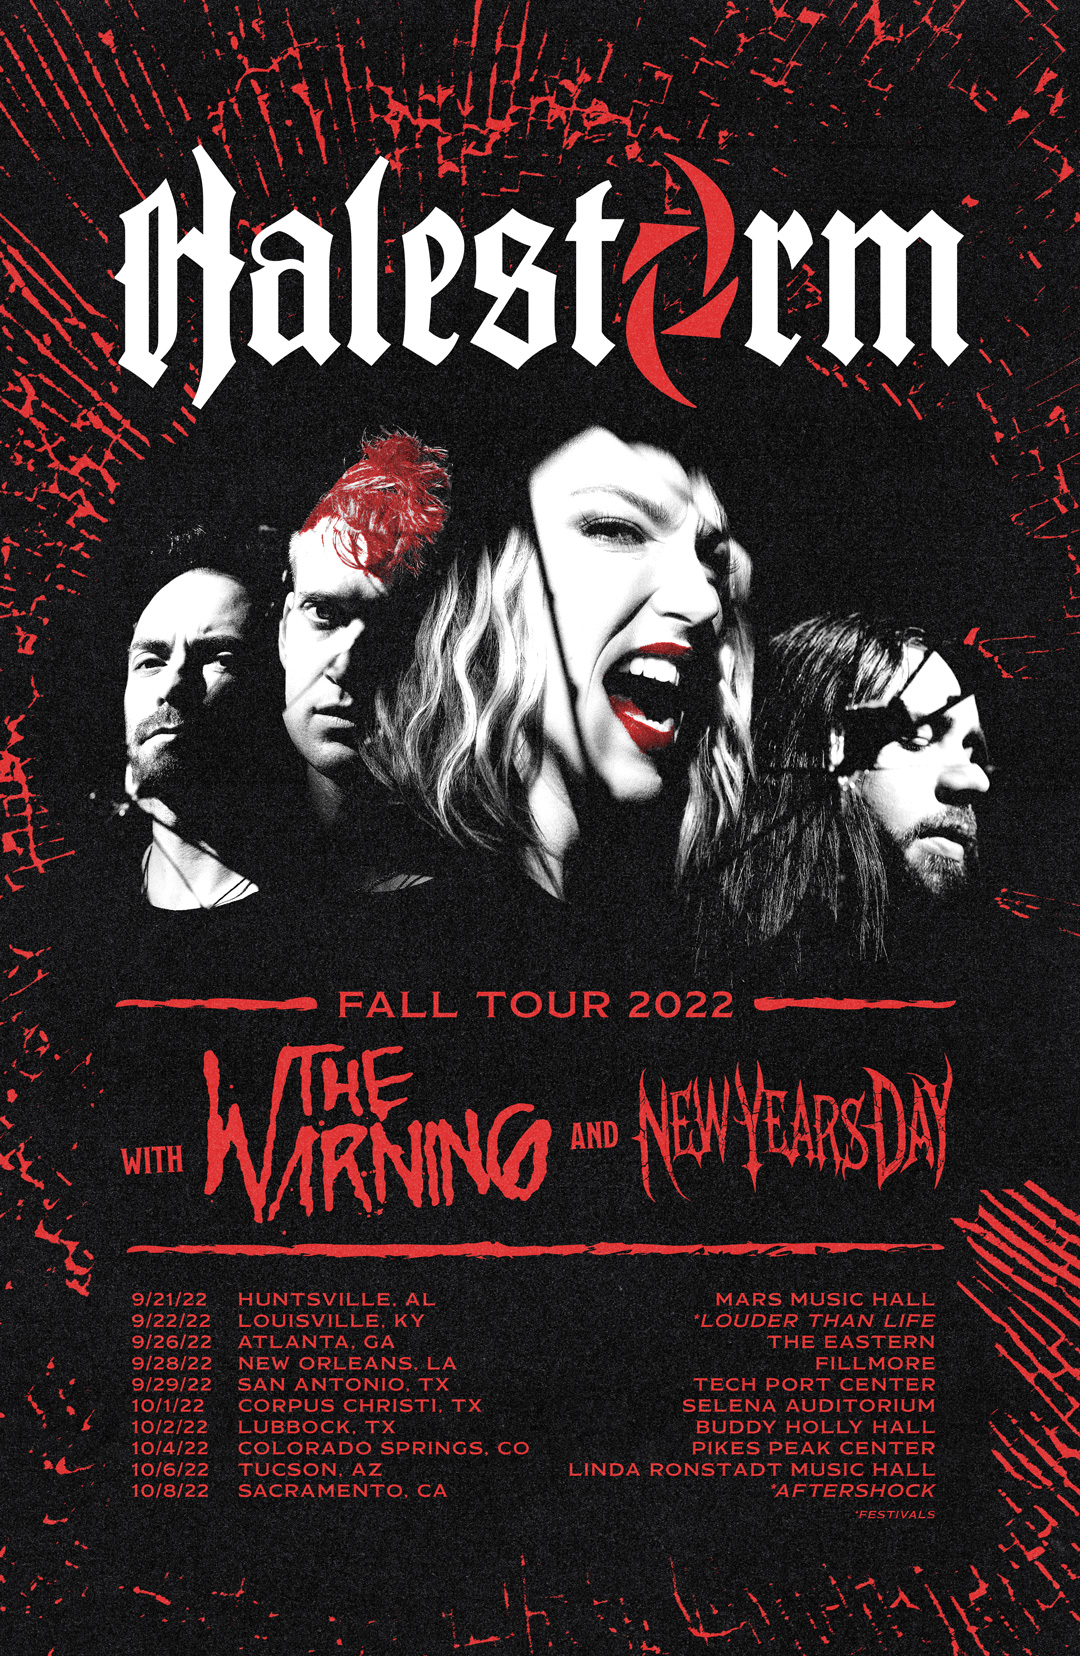 New Years Day Joins Halestorm For Their Fall Headline Tour